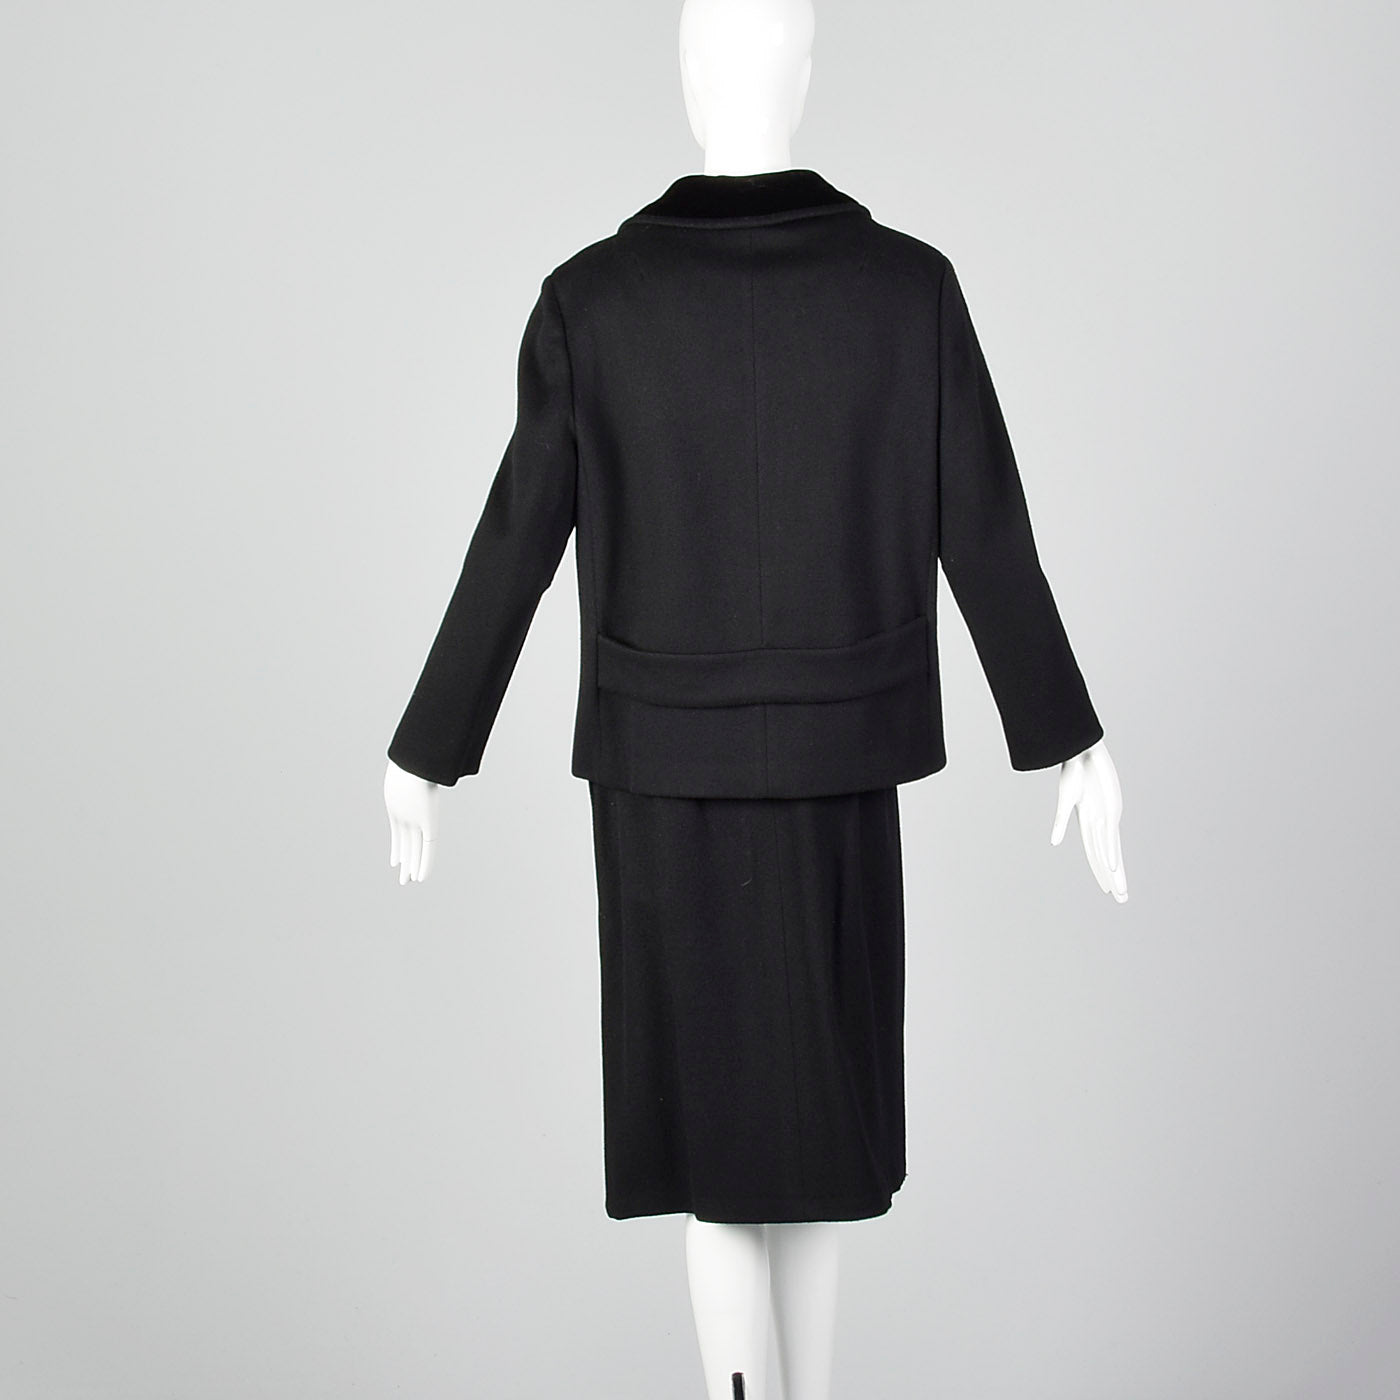 1960s Black Winter Skirt Suit with Boxy Jacket and Pencil Skirt